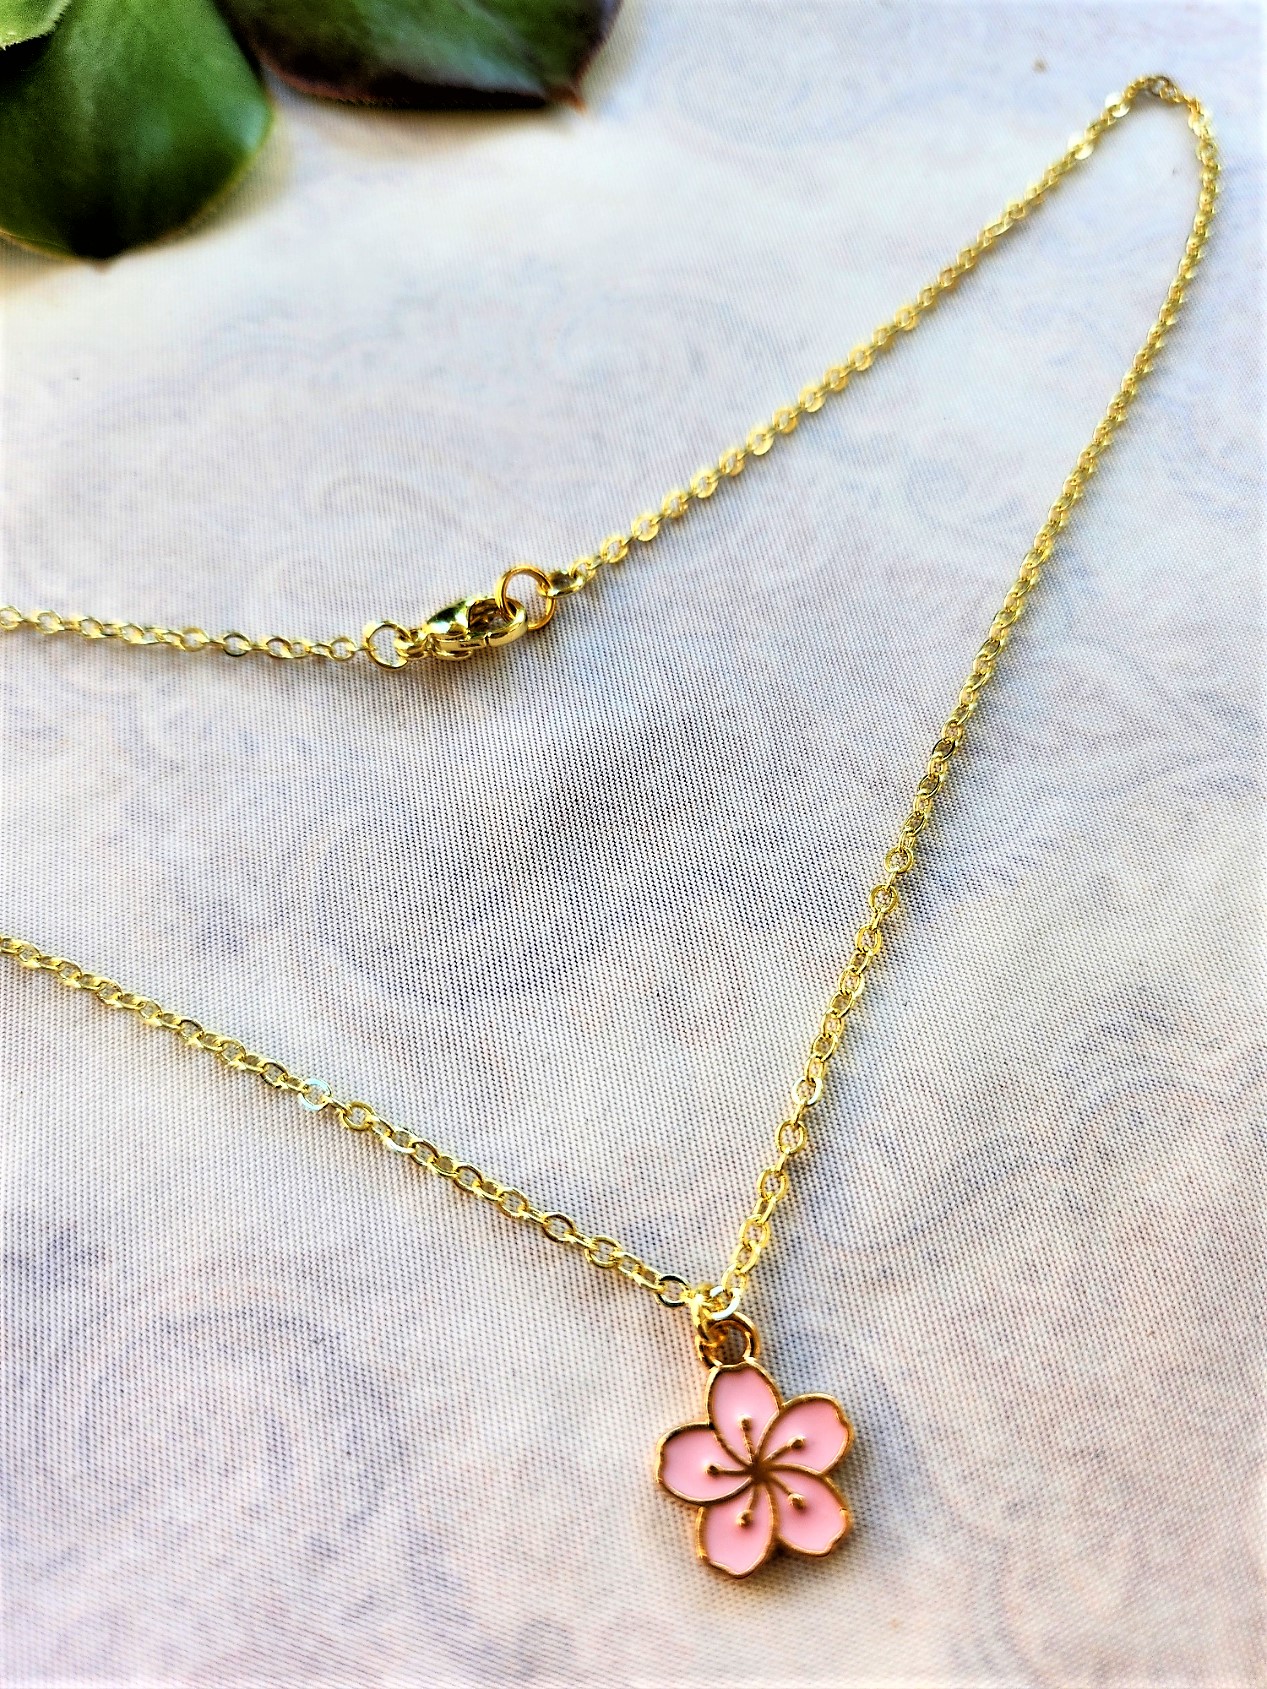 Cherry Blossom Pendant Necklace in Pink Gold